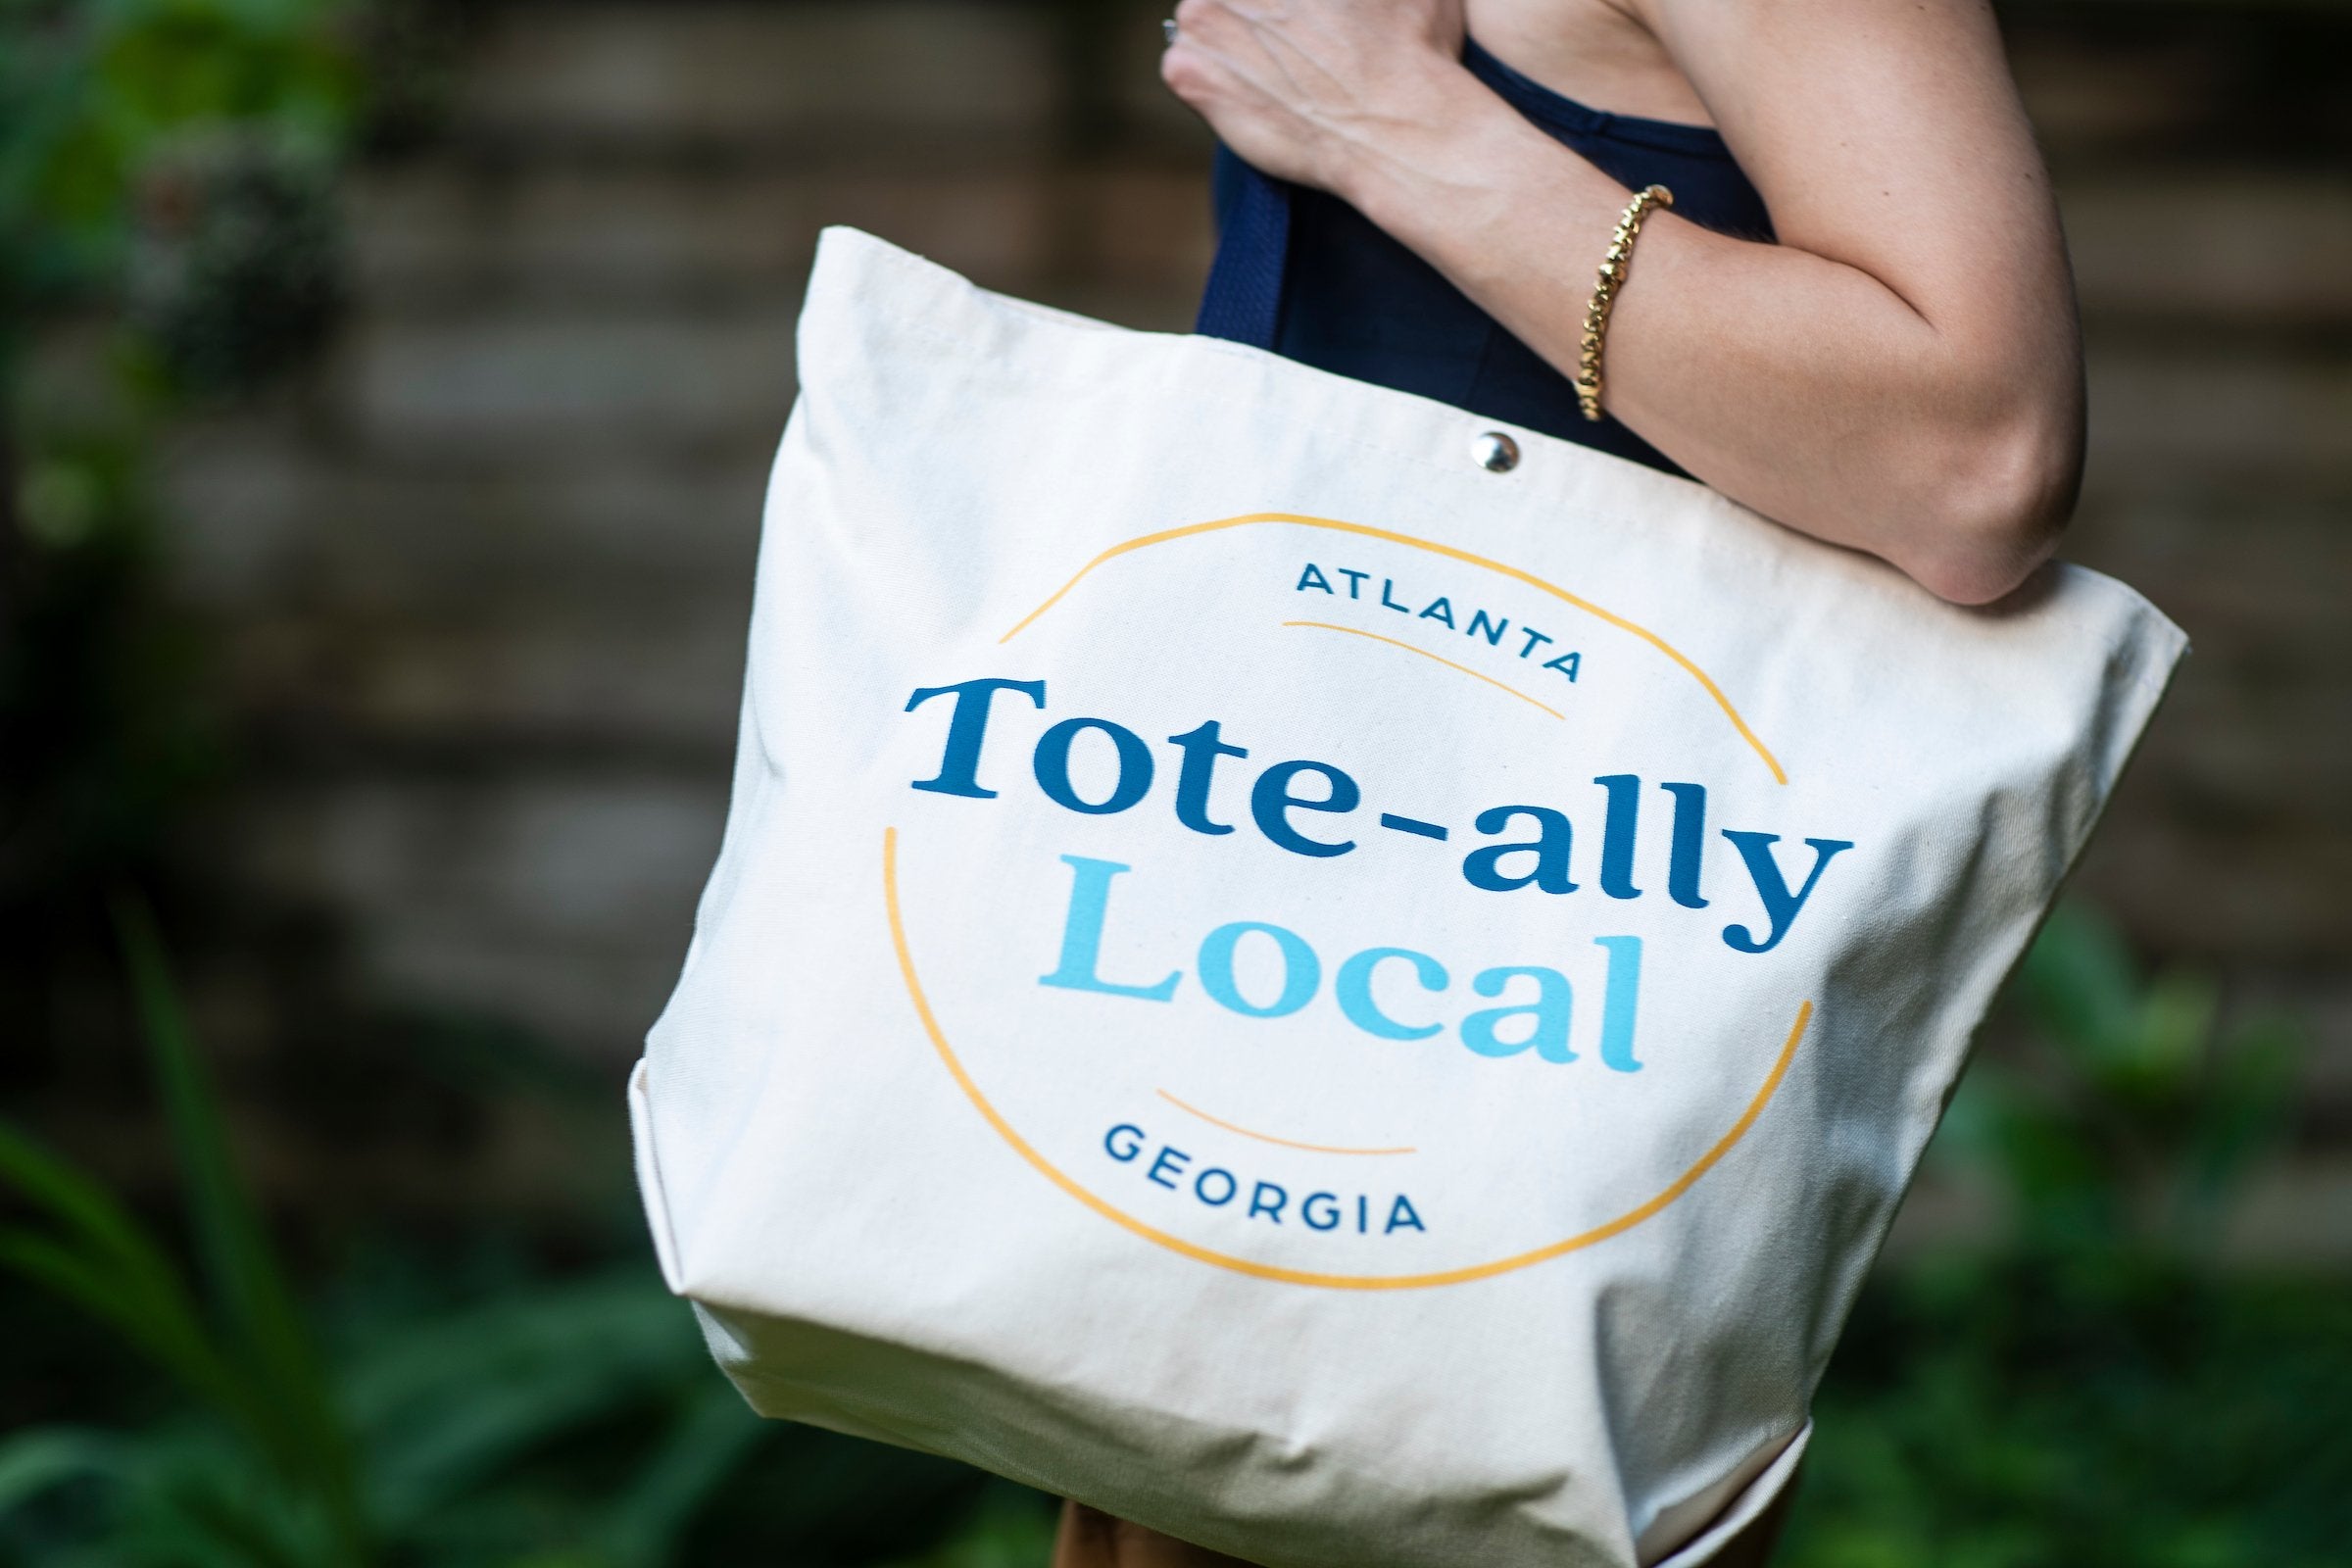 Tote-ally Still in Fashion - Tallahassee Magazine